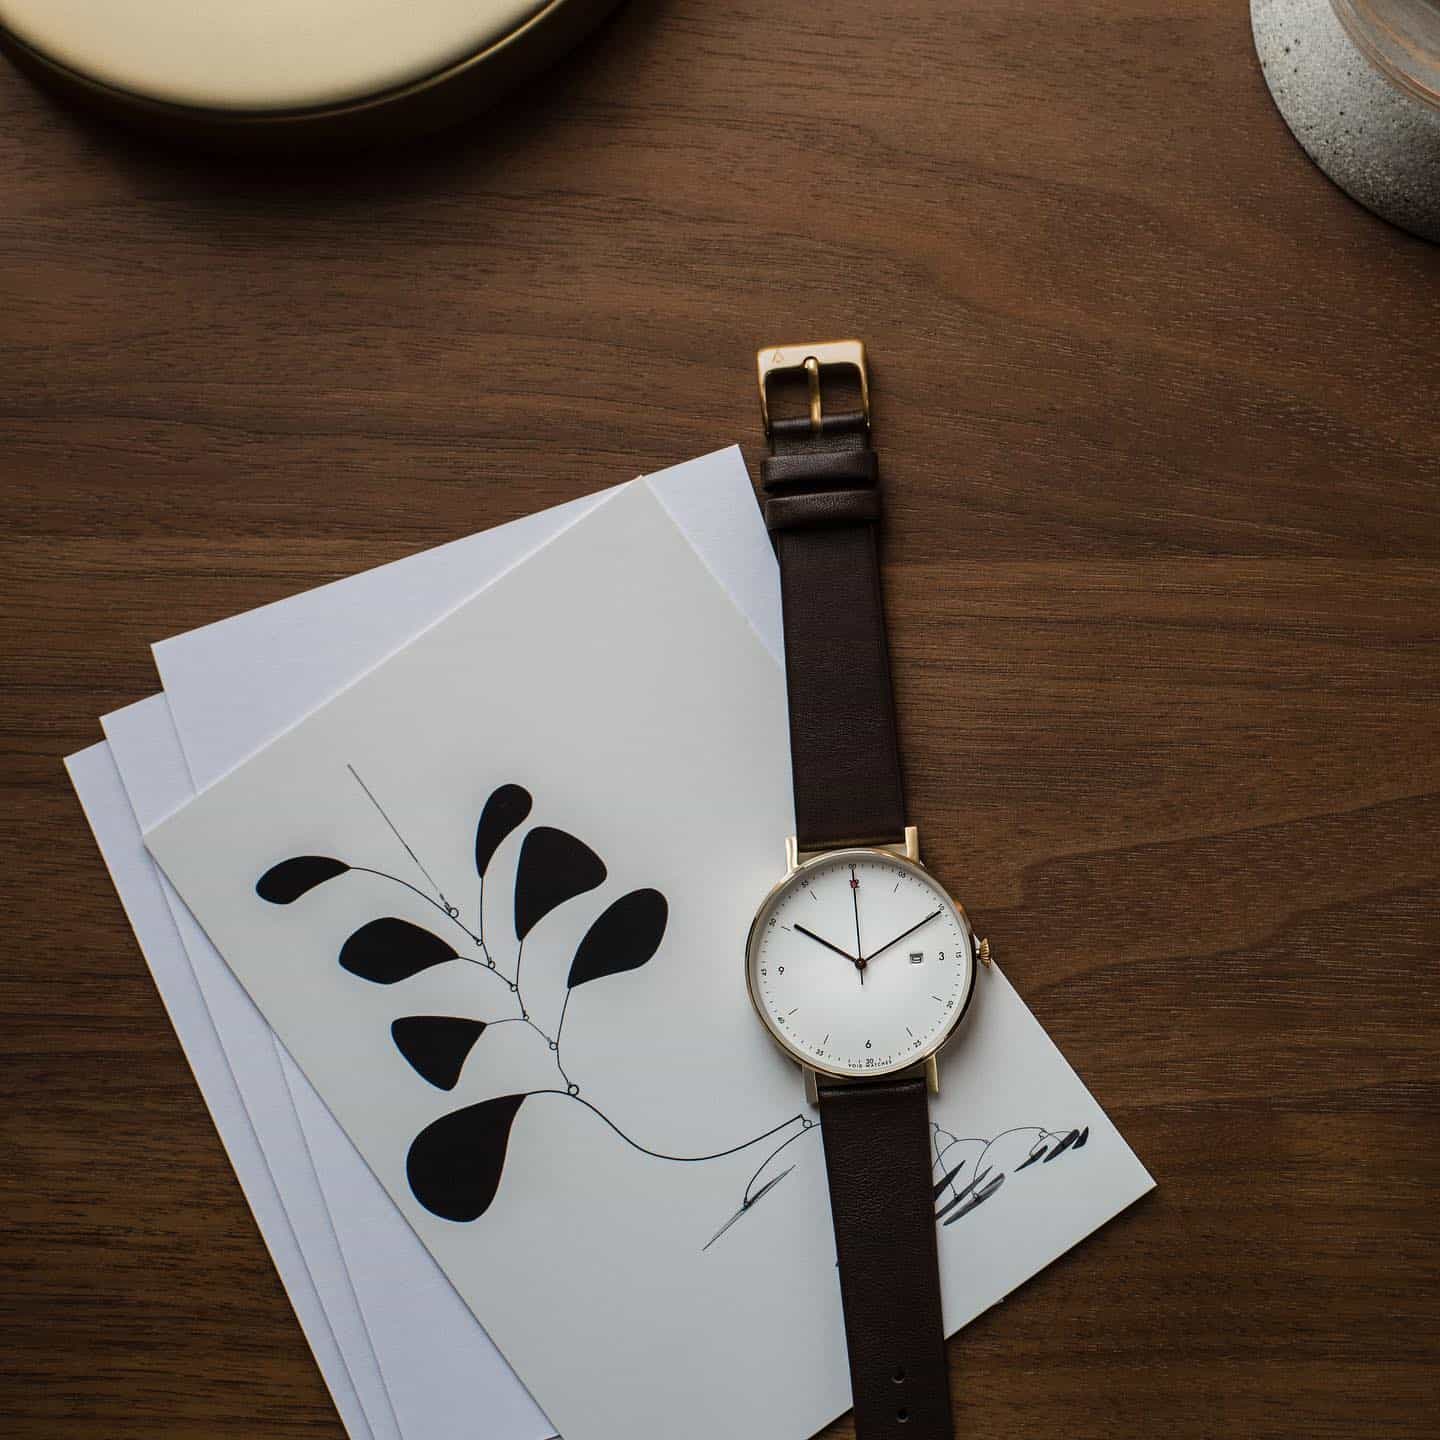 The PKG01-GO date watch by void watches